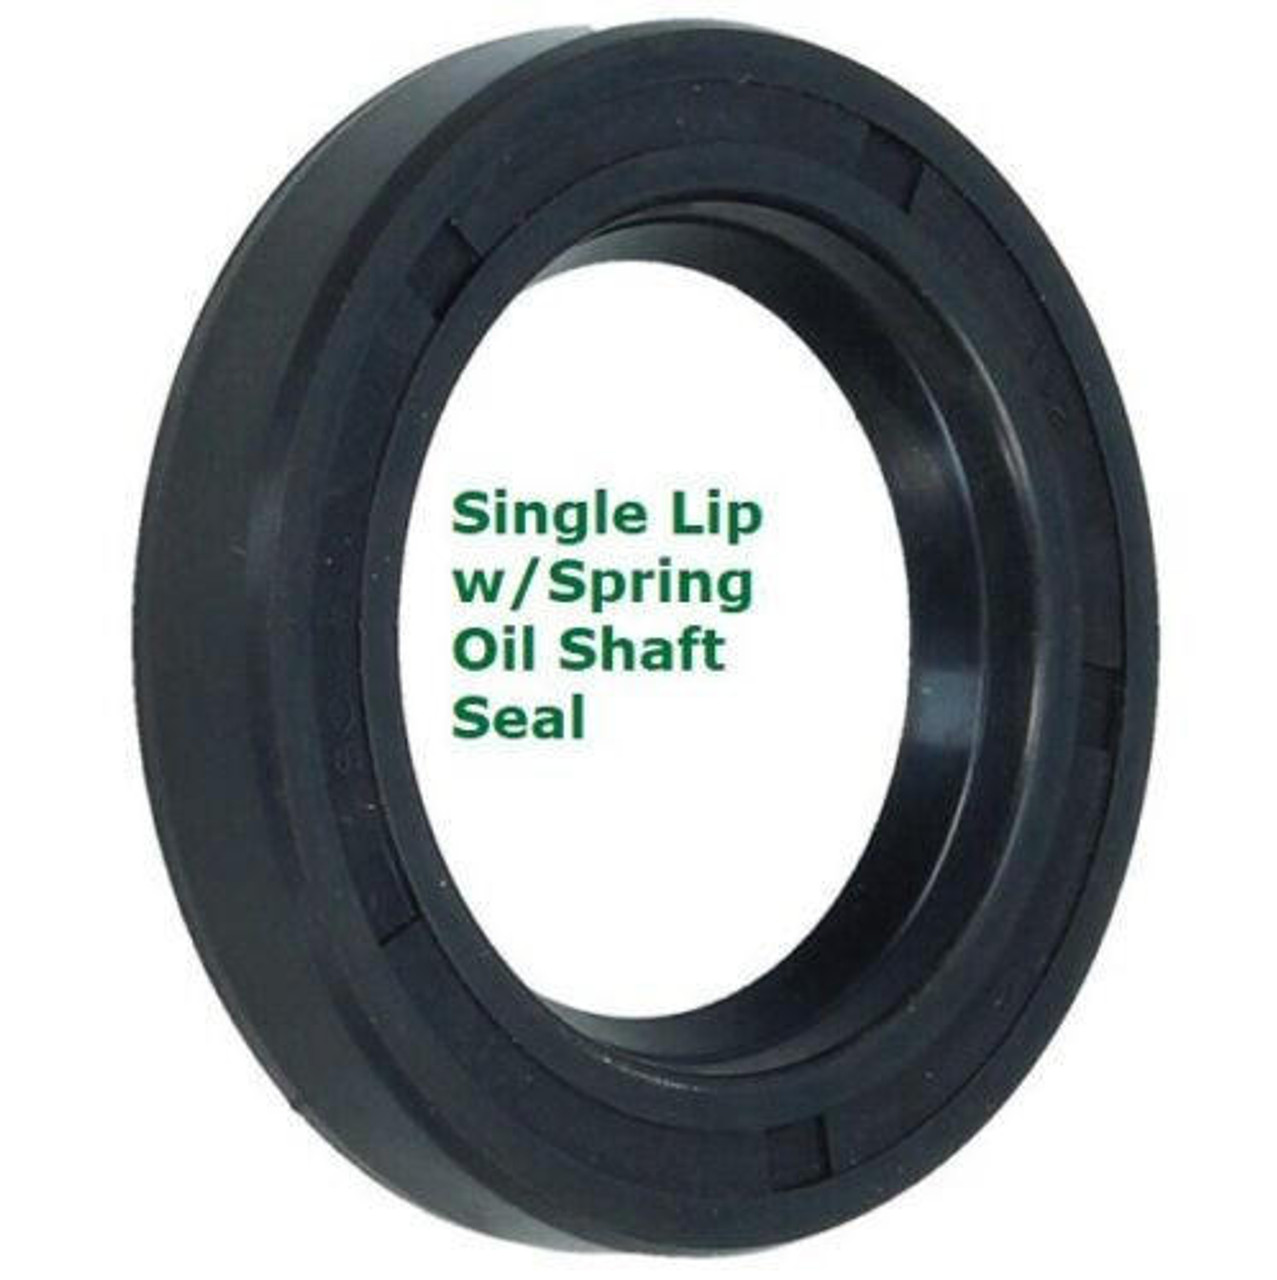 Metric Oil Shaft Seal 45 x 85 x 13mm   Price for 1 pc